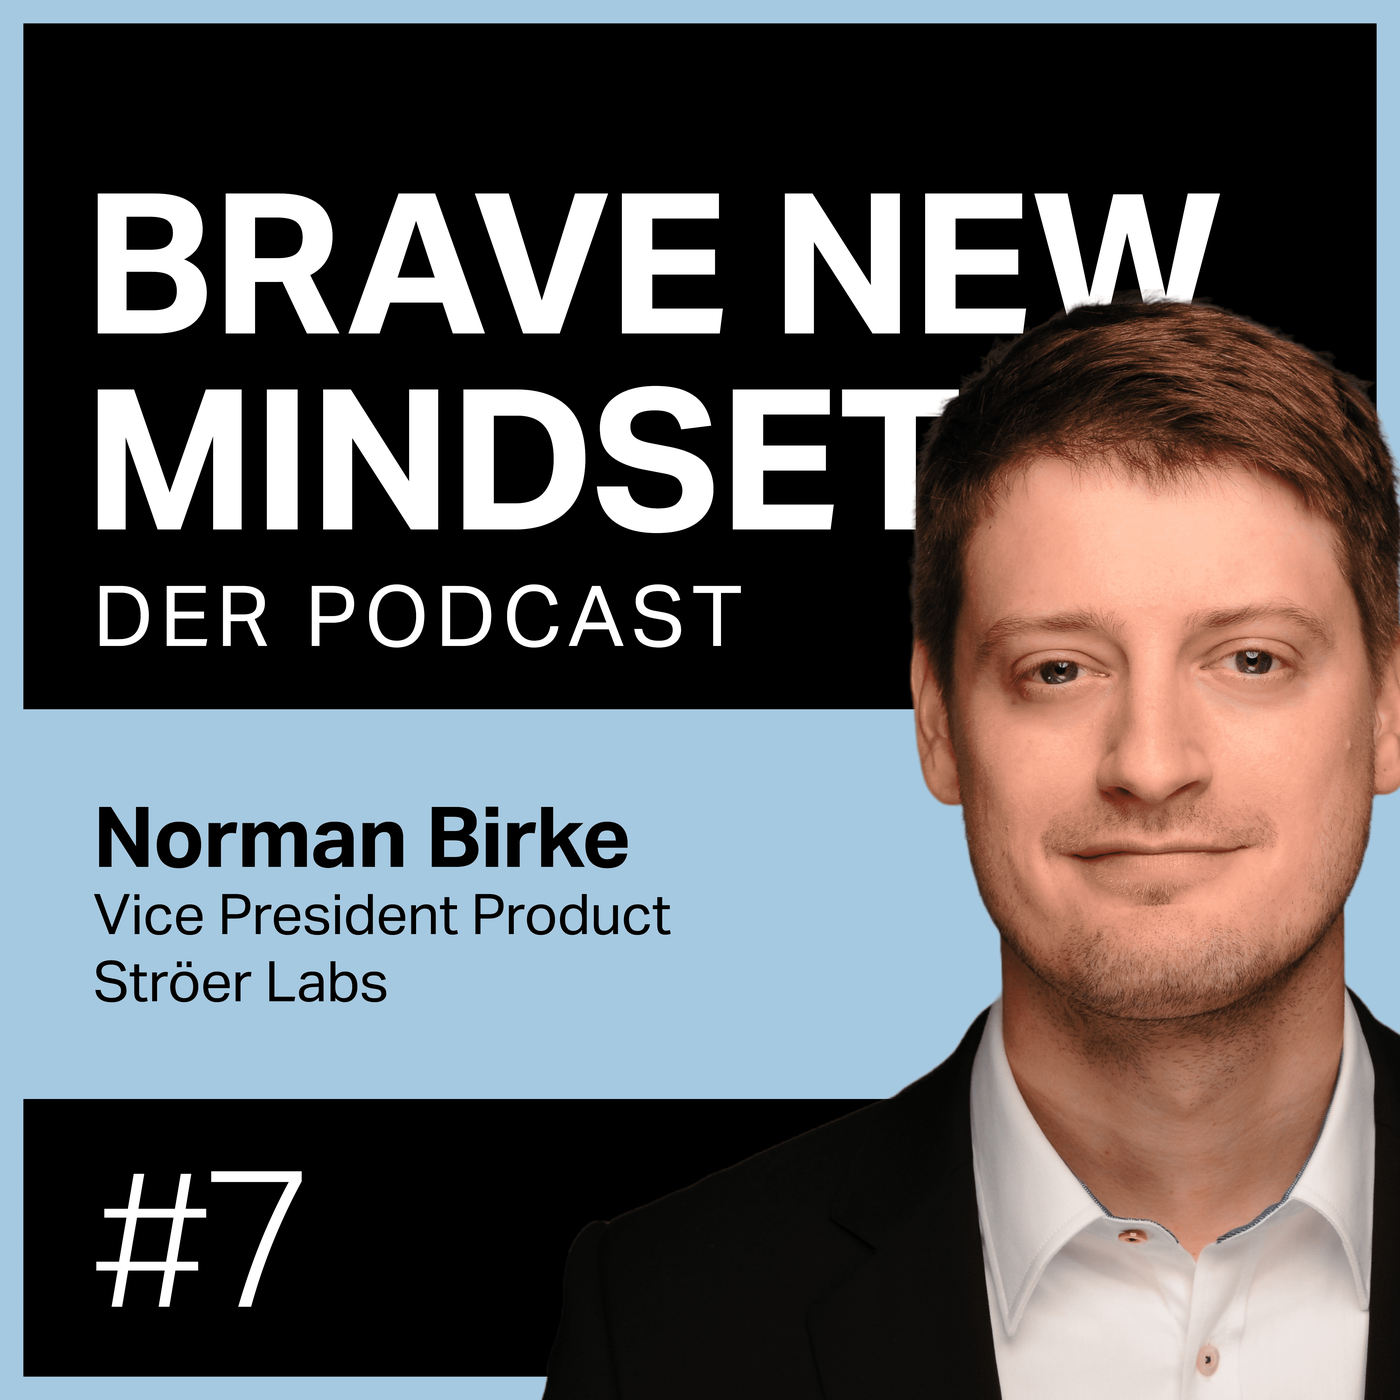 #07 Norman Birke | Vice President Product bei STRÖER Labs